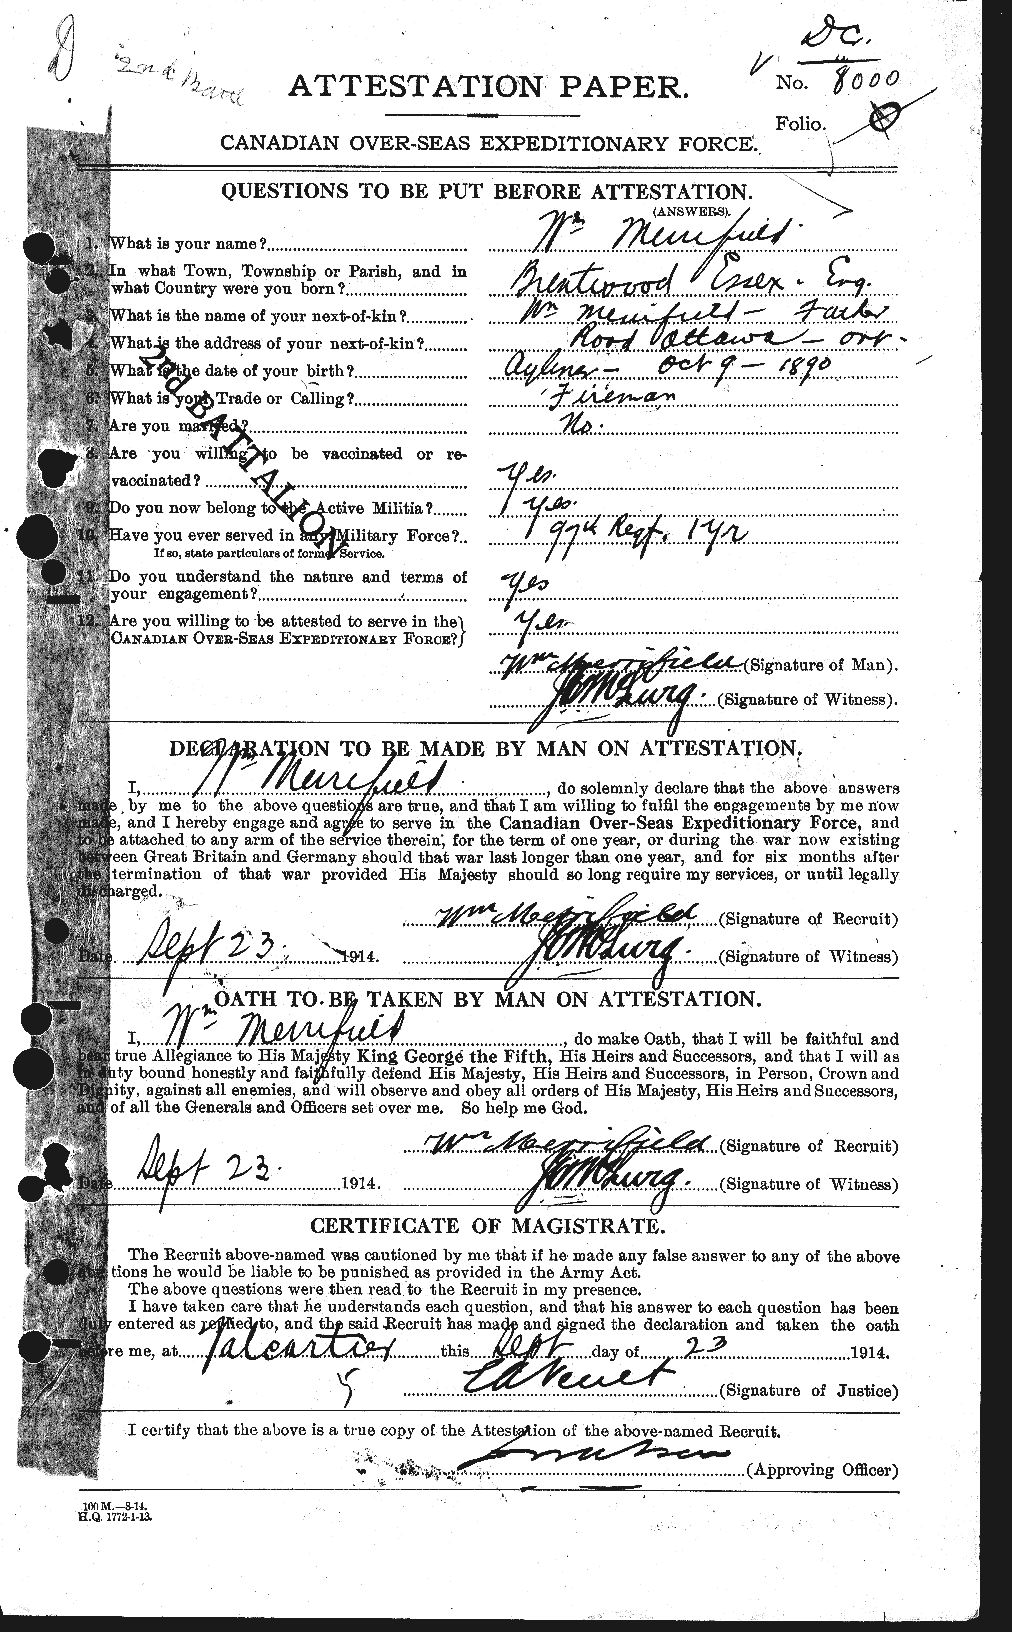 Personnel Records of the First World War - CEF 490315a